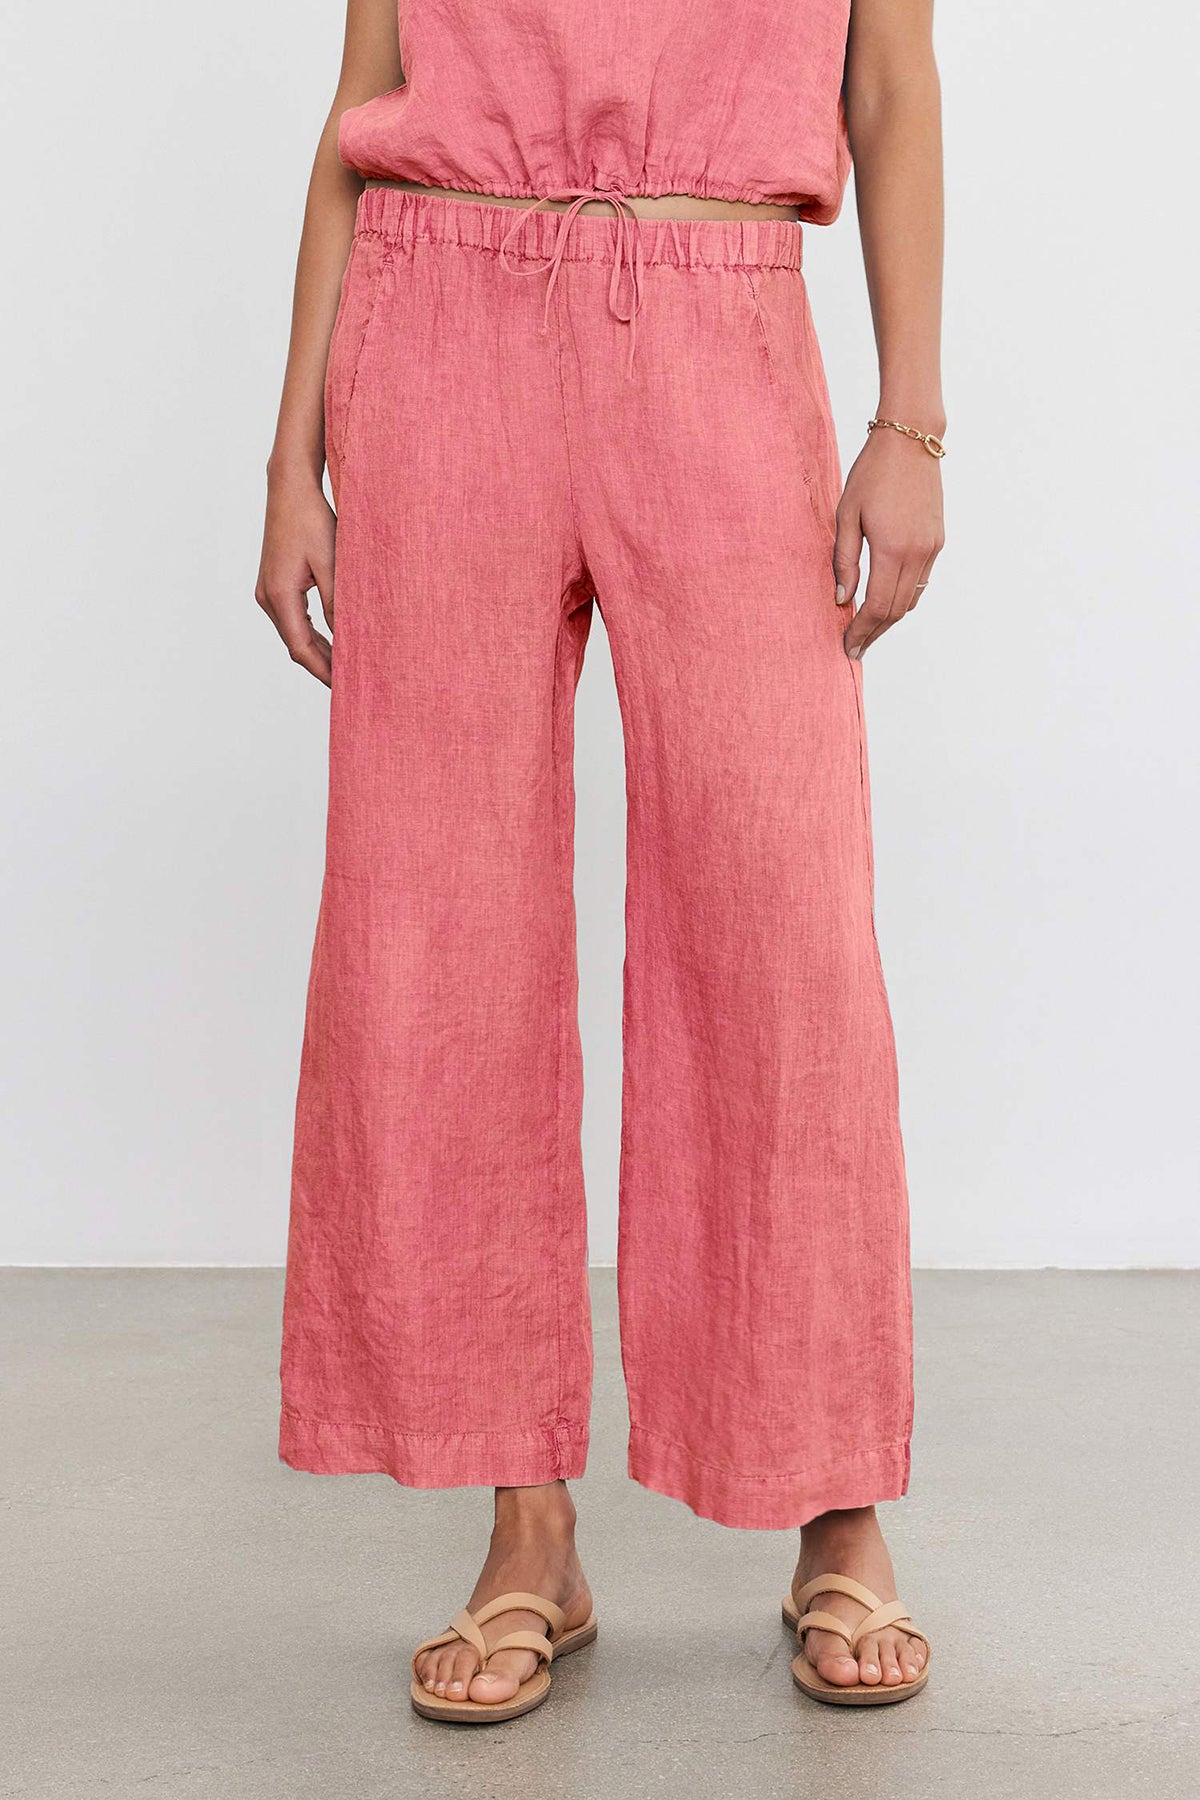   A person wearing lightweight pink LOLA LINEN PANT by Velvet by Graham & Spencer with an elastic waistband and drawstring, a matching top, a bracelet on the left wrist, and beige sandals on a plain grey floor. 